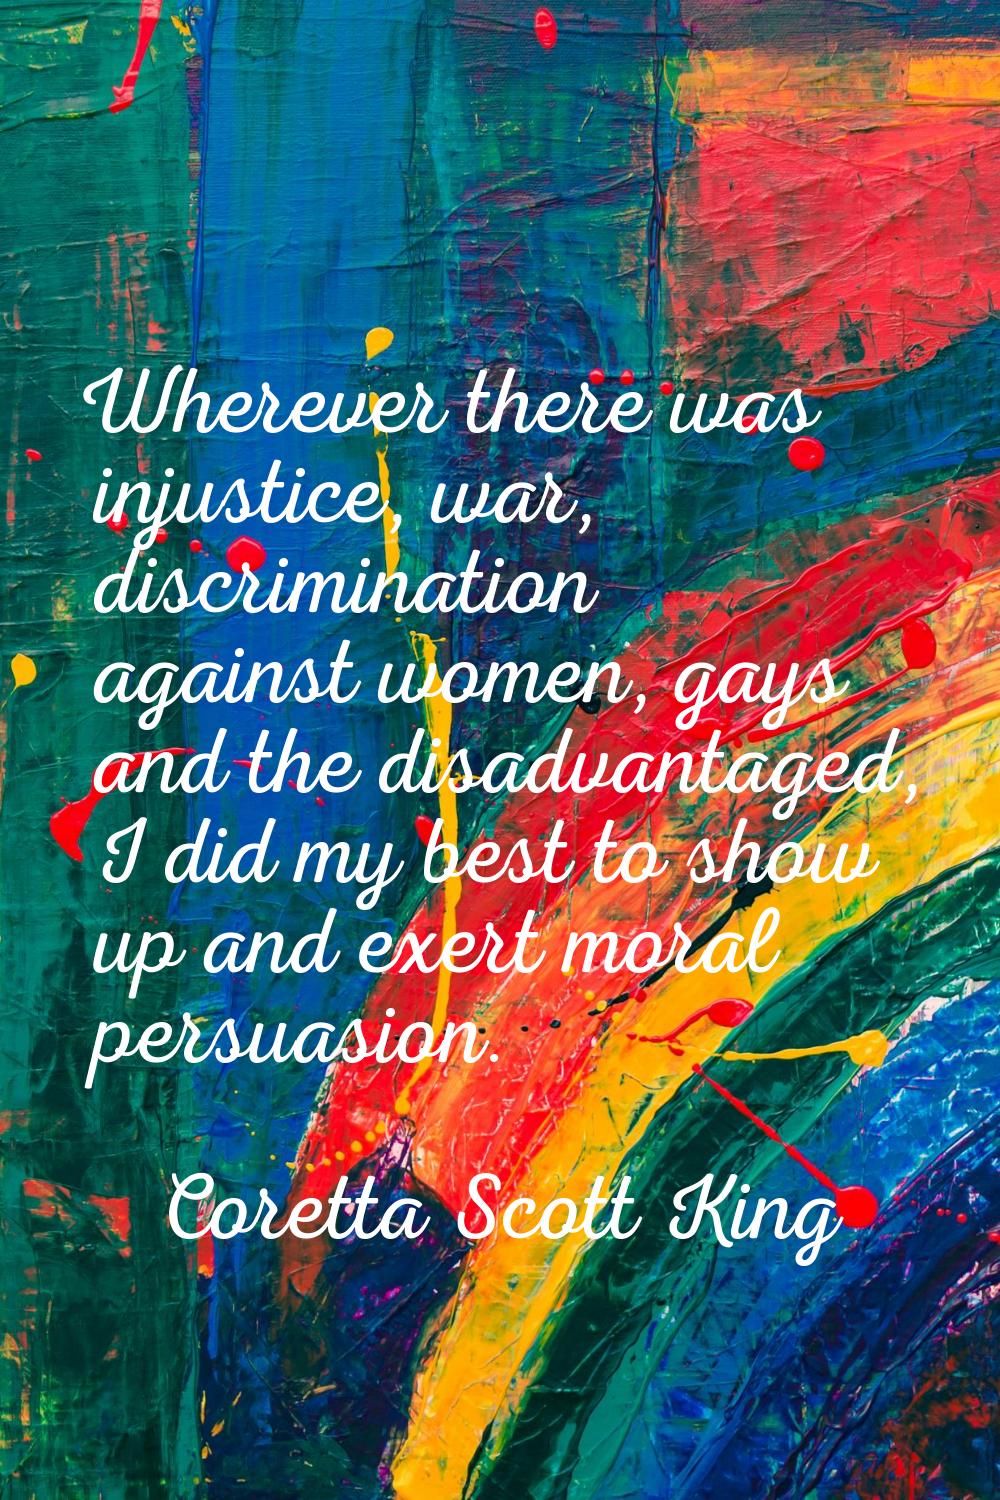 Wherever there was injustice, war, discrimination against women, gays and the disadvantaged, I did 